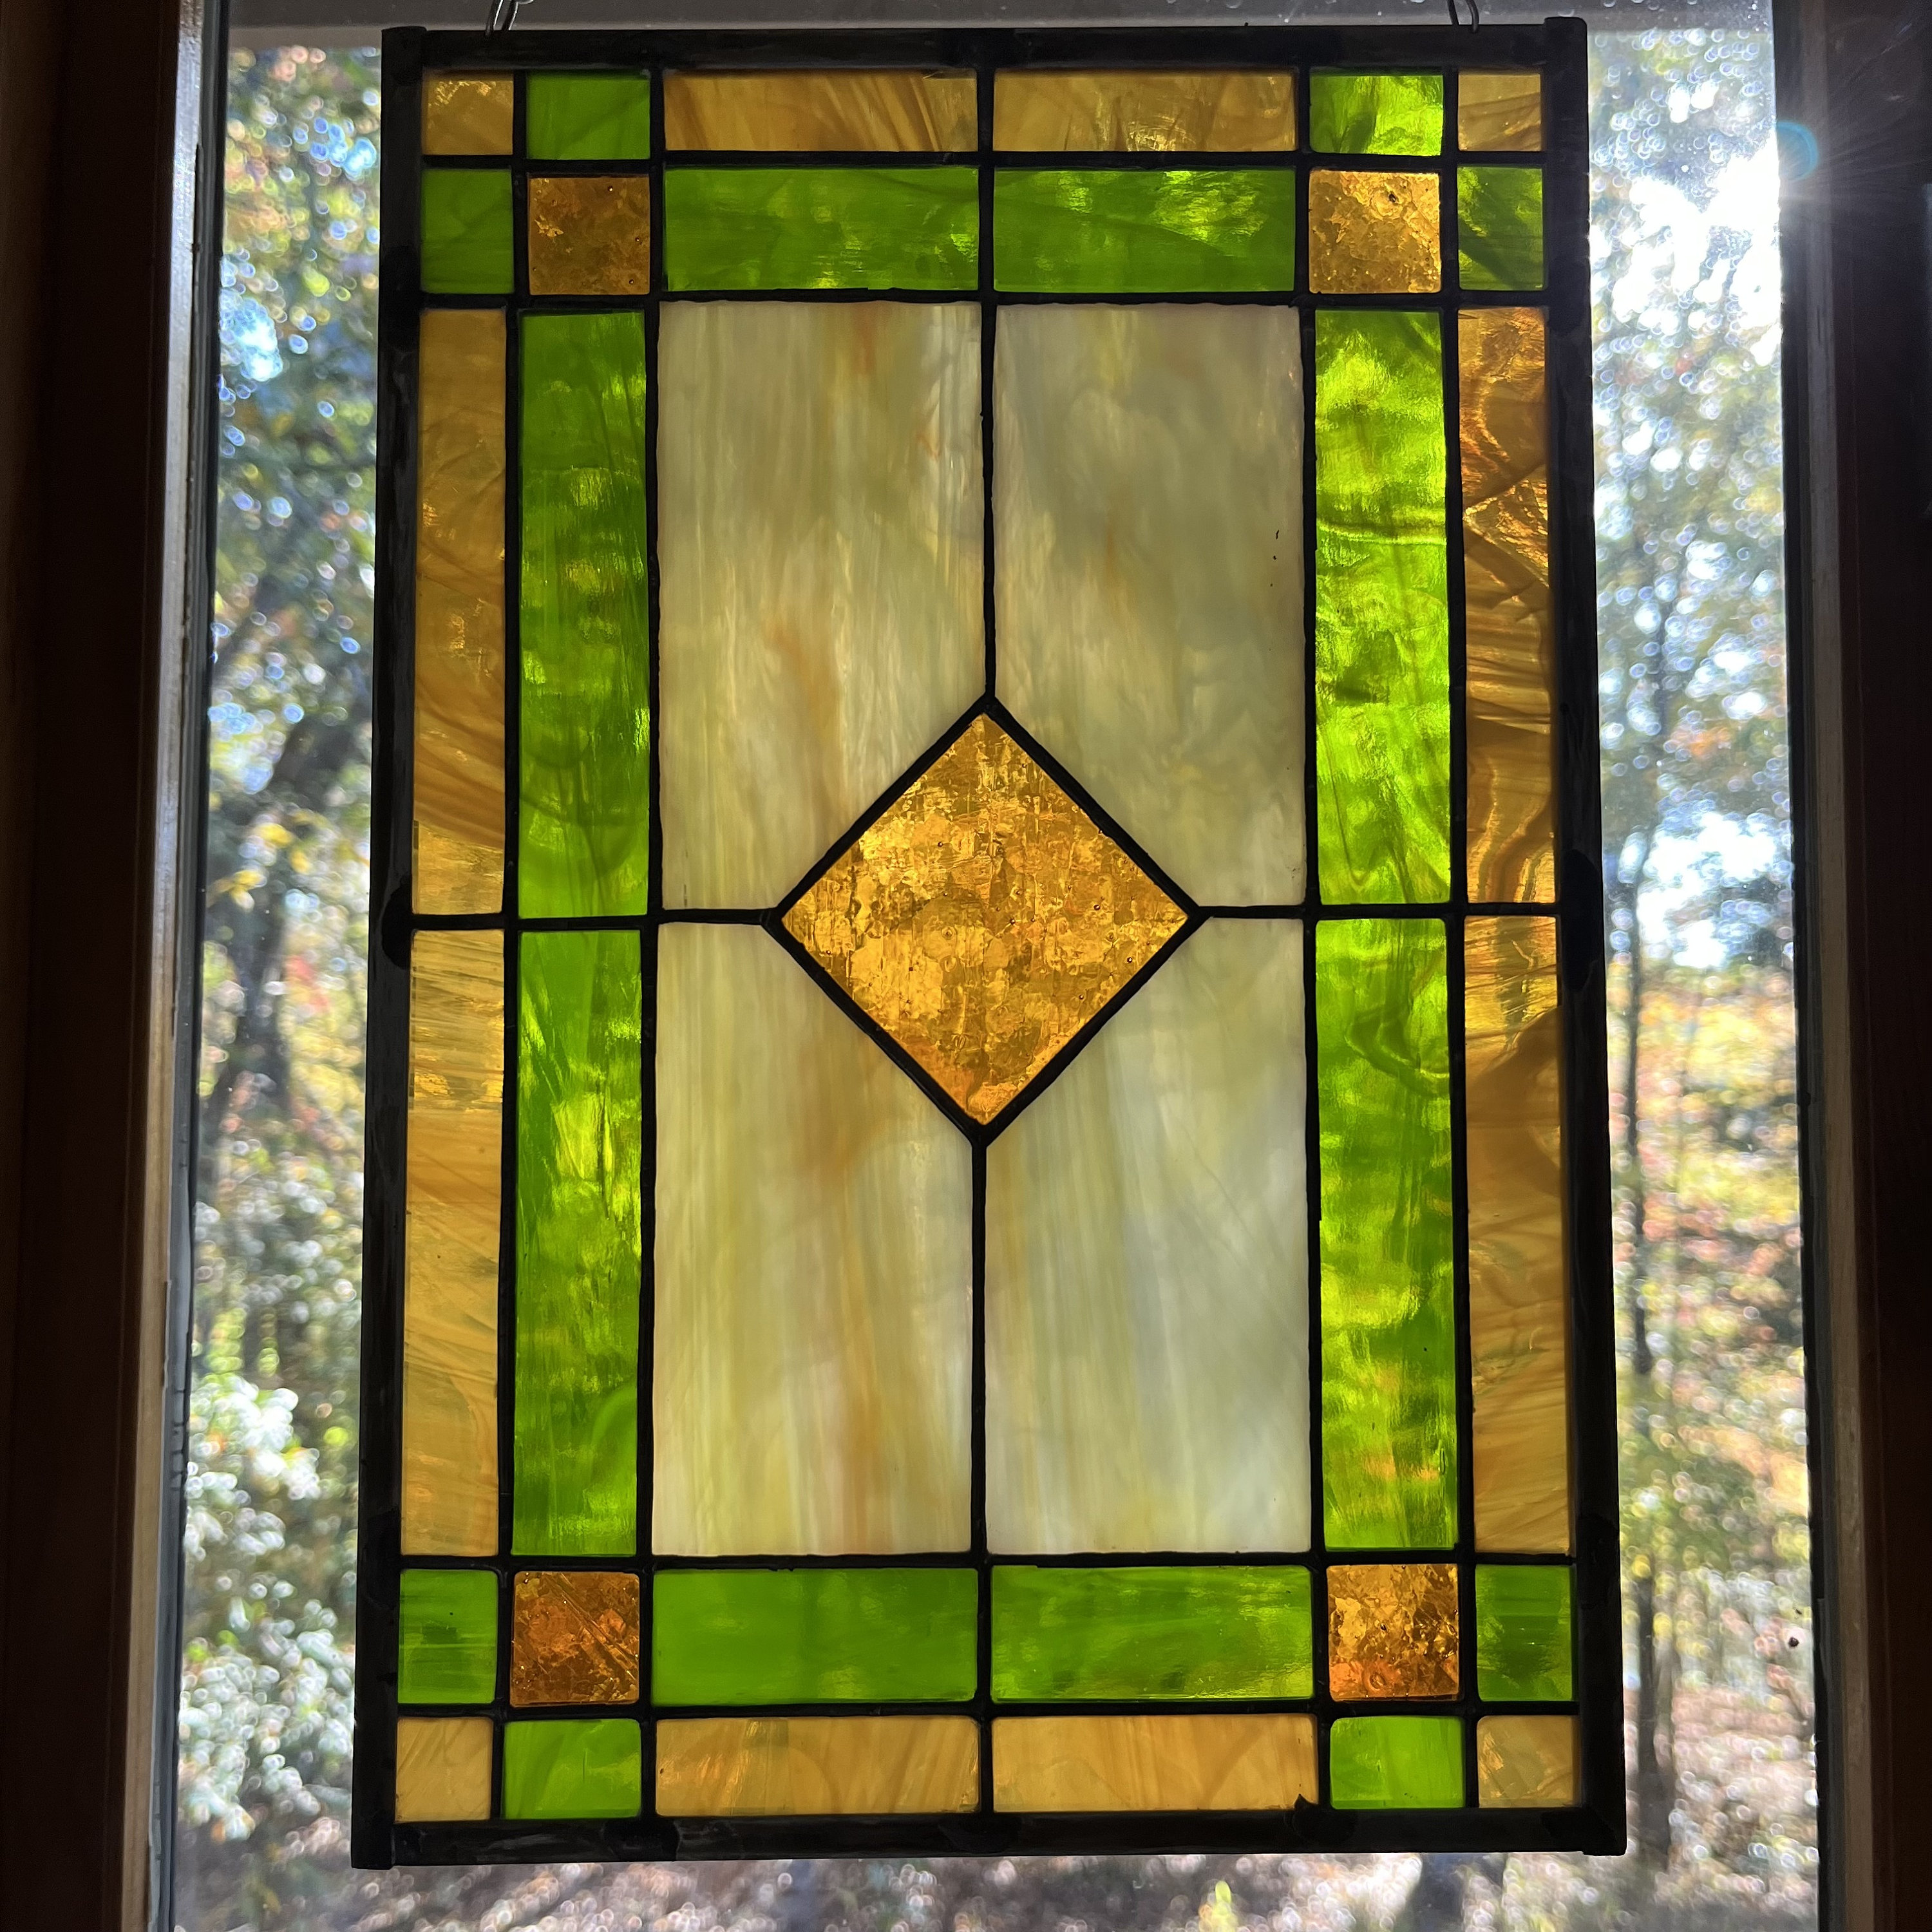 Gallery Glass Class: Susan's Craftsman Style Dining Room Windows   Craftsman style dining room, Window stained, Stained glass window panel